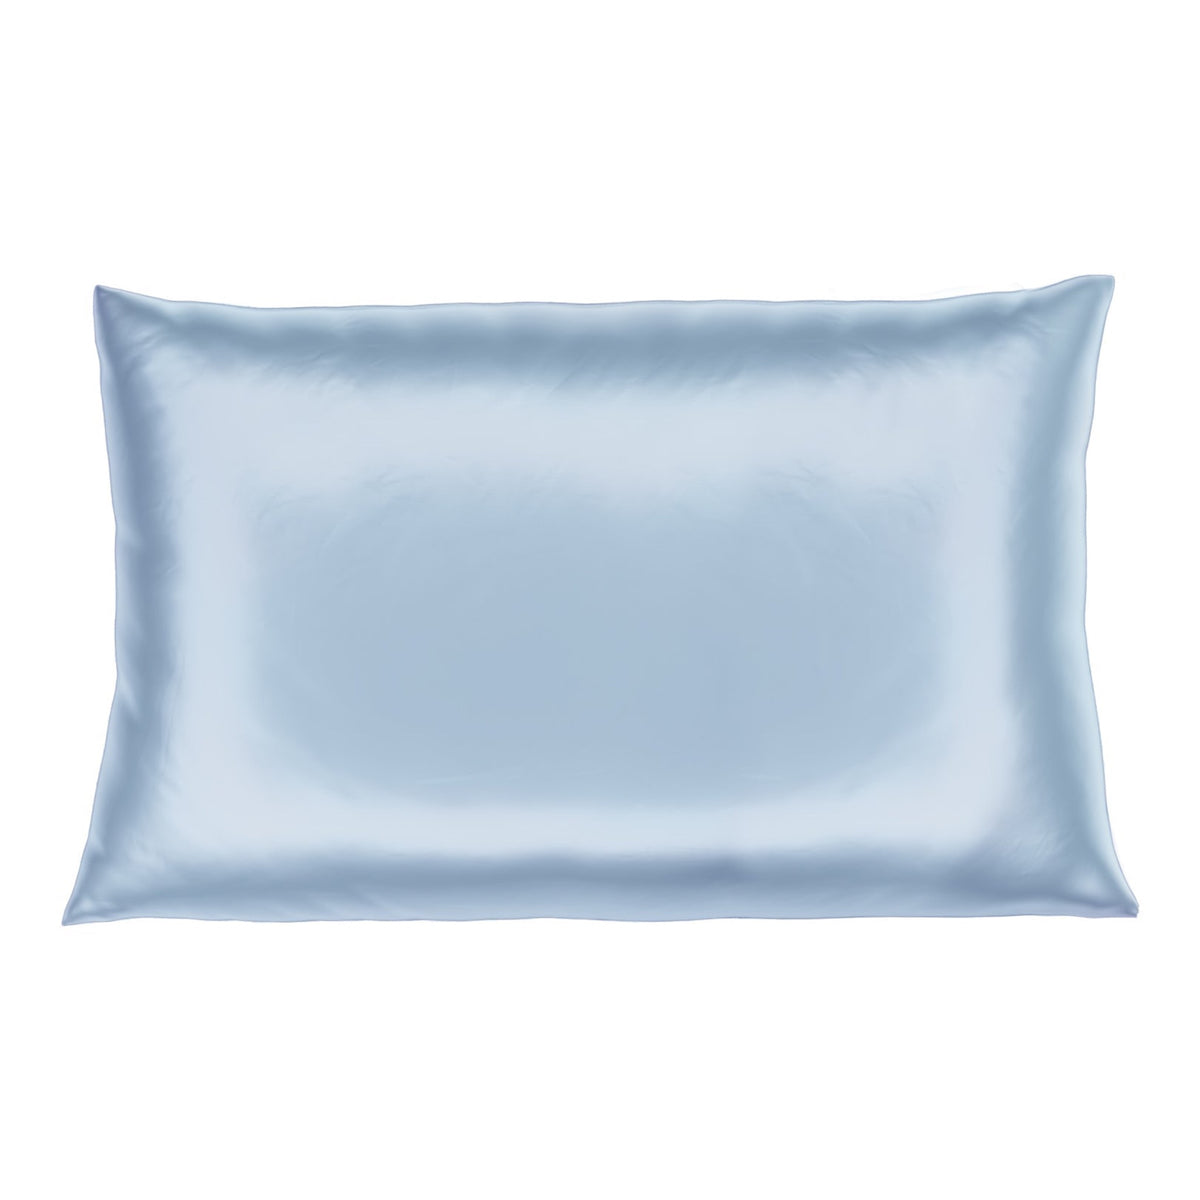 Mulberry Park Silks Deluxe 19 Momme Pure Silk Pillowcase in Blue Color